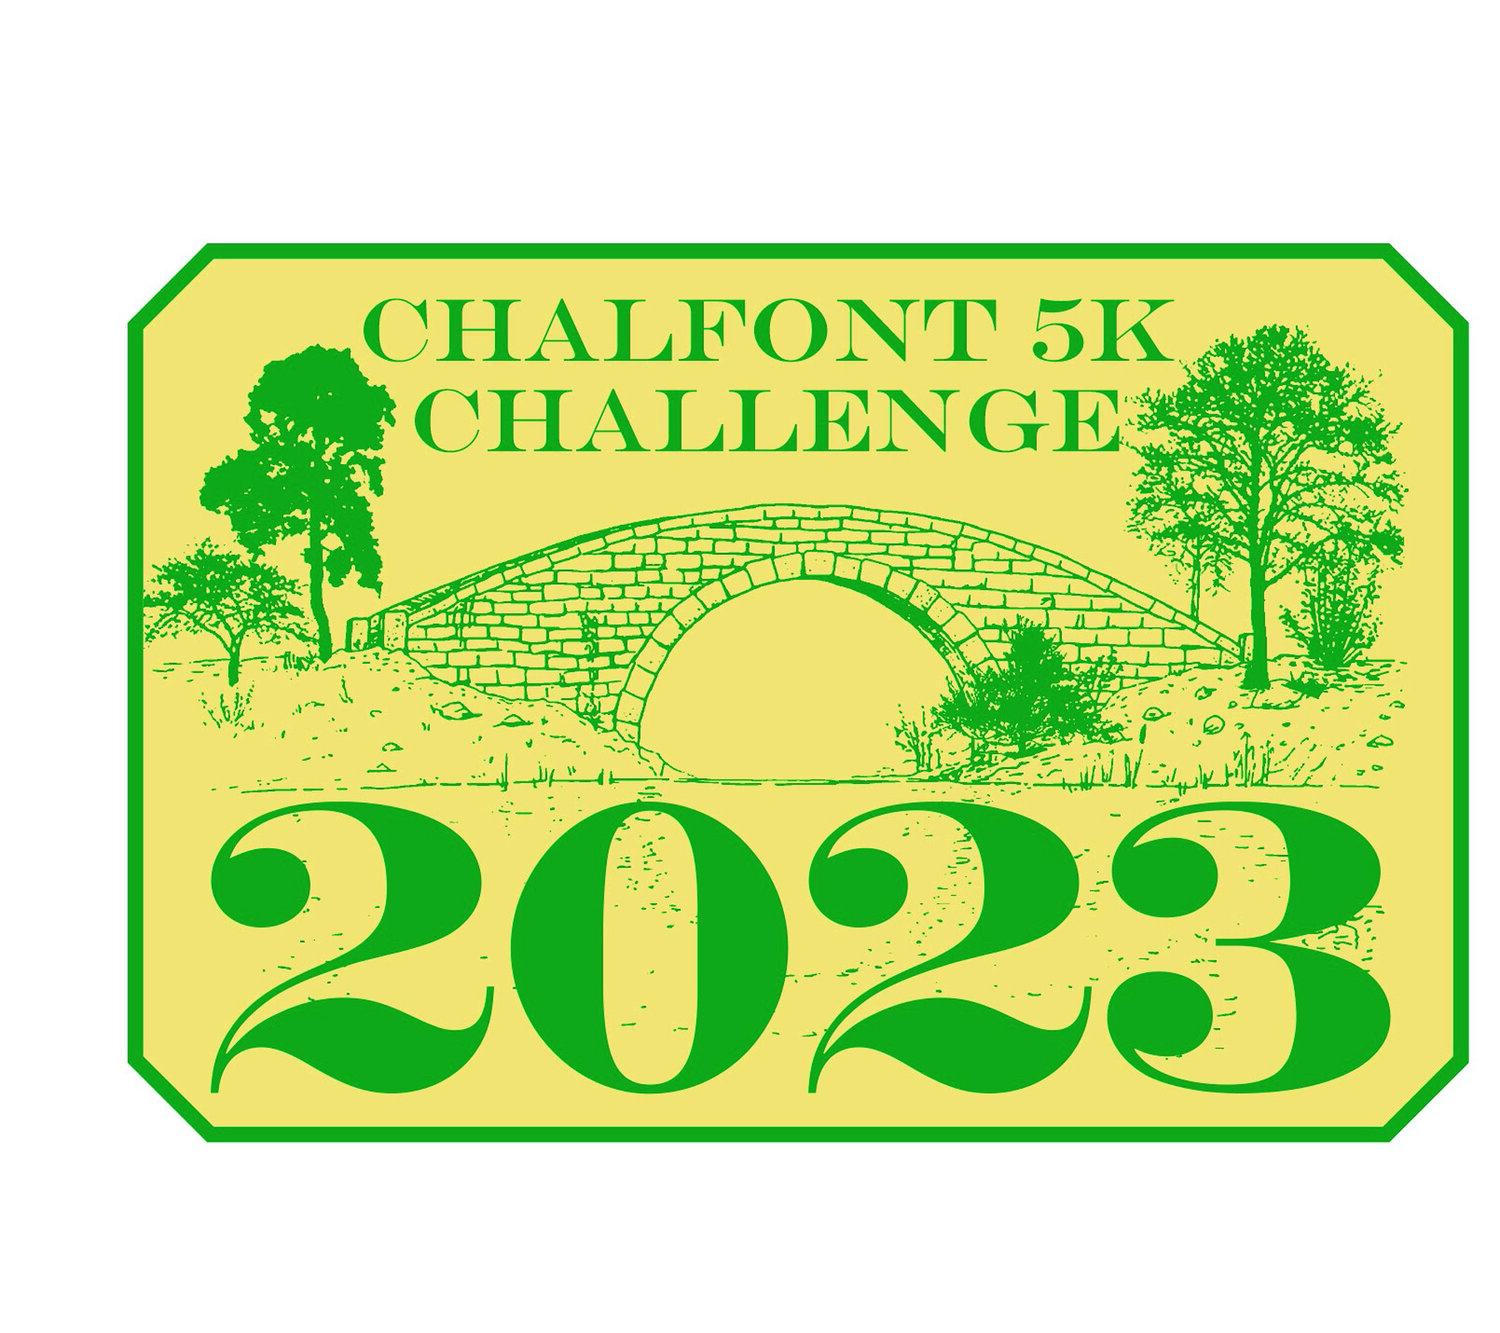 This year’s Chalfont Challenge marked the end of the community race launched 31 years ago.